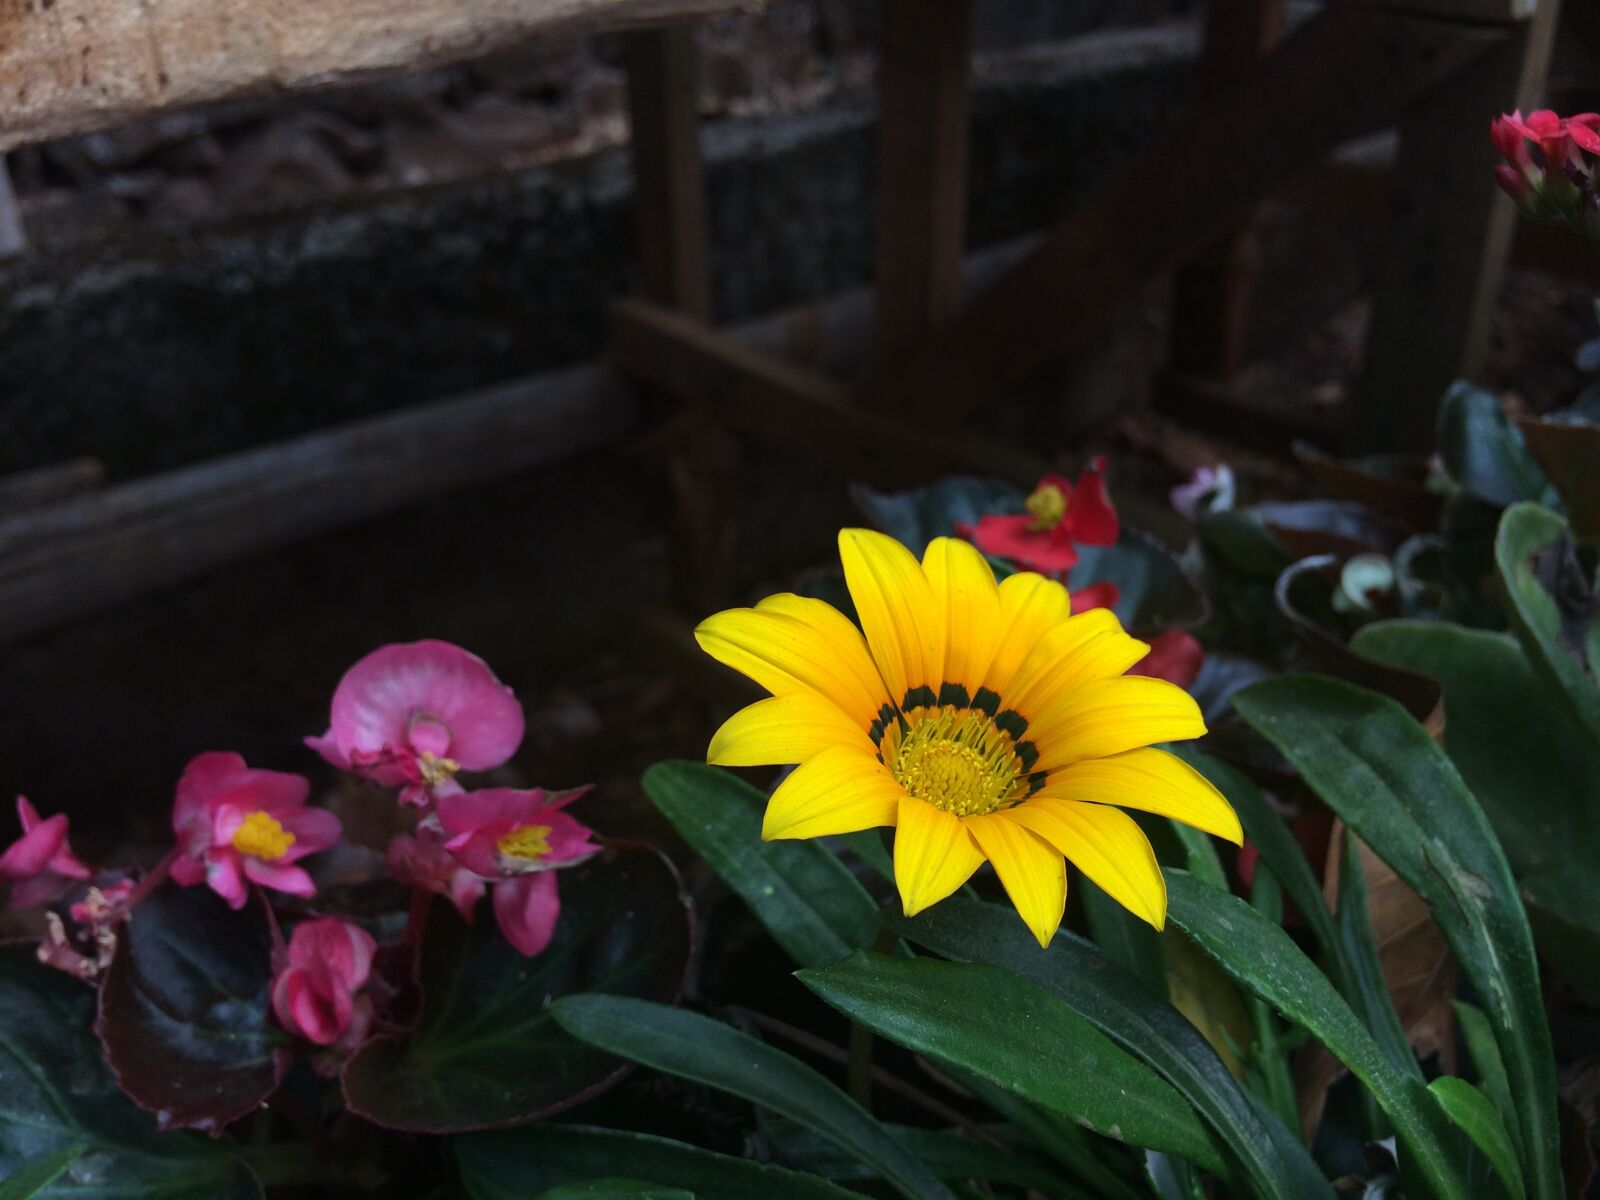 Apple iPhone 5s sample photo. Flower show, yellow, flora photography